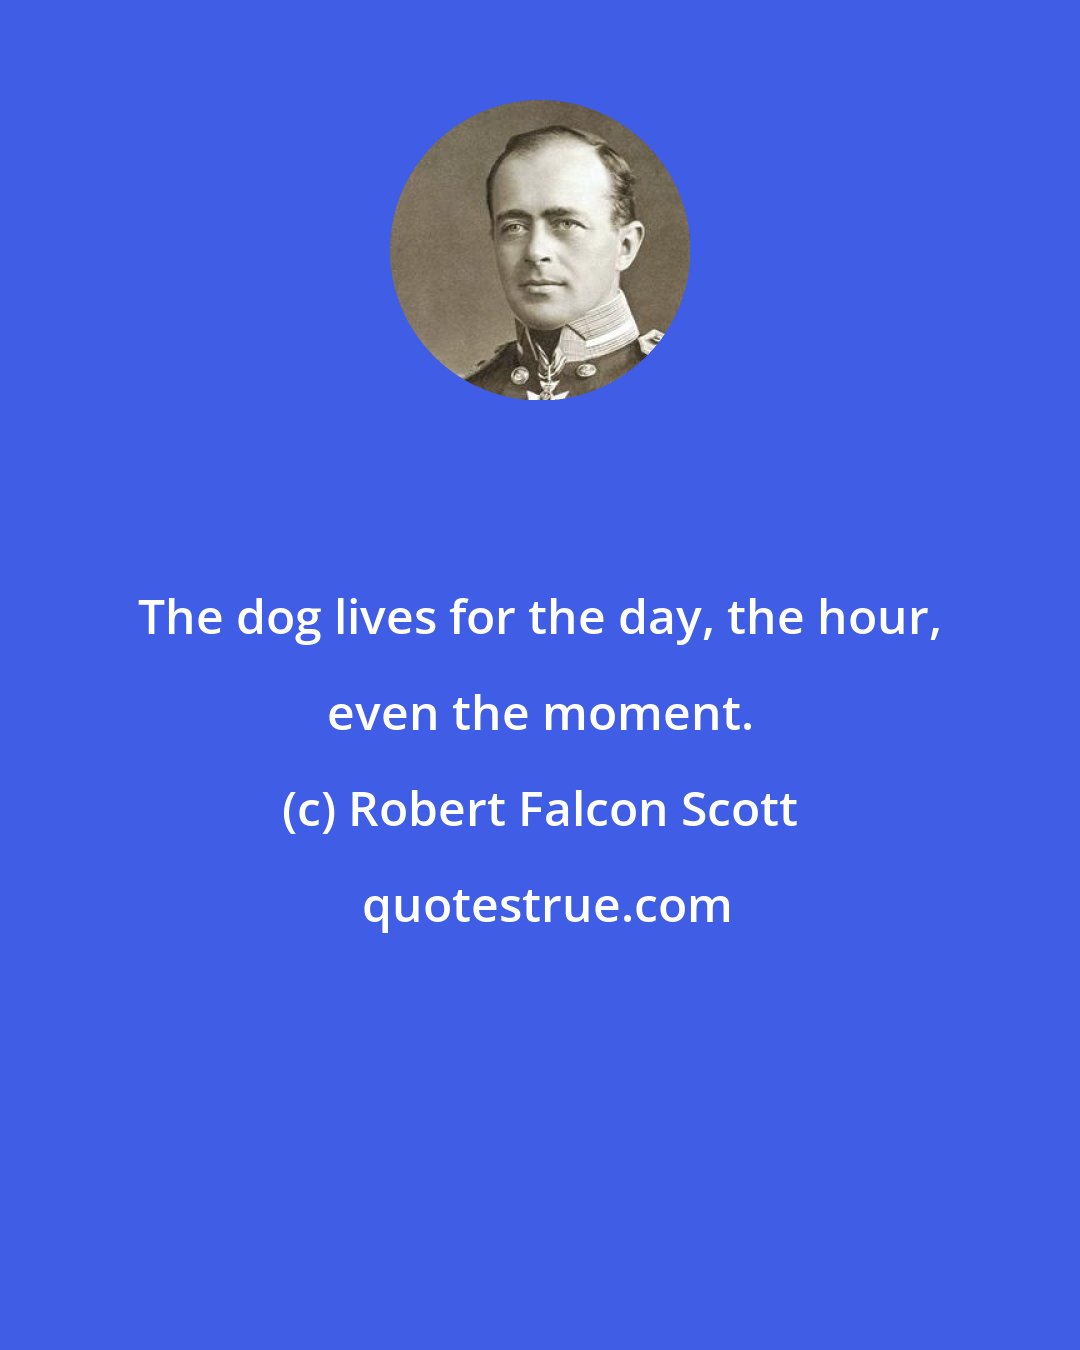 Robert Falcon Scott: The dog lives for the day, the hour, even the moment.